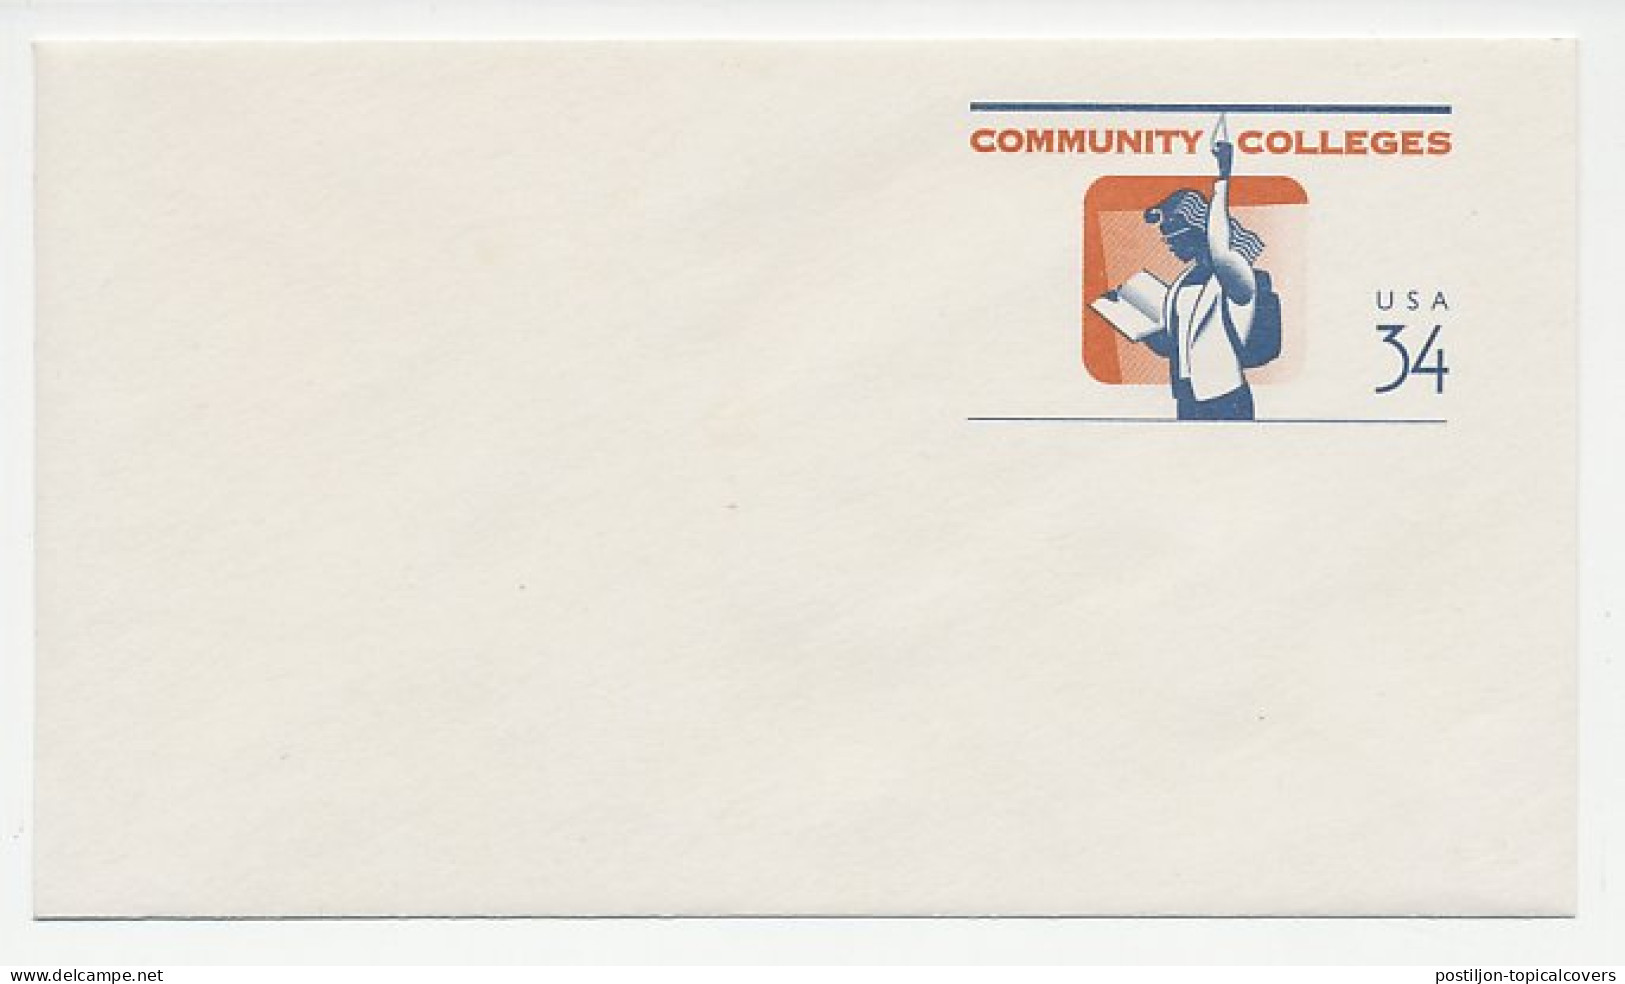 Postal Stationery USA Community Colleges - Unclassified